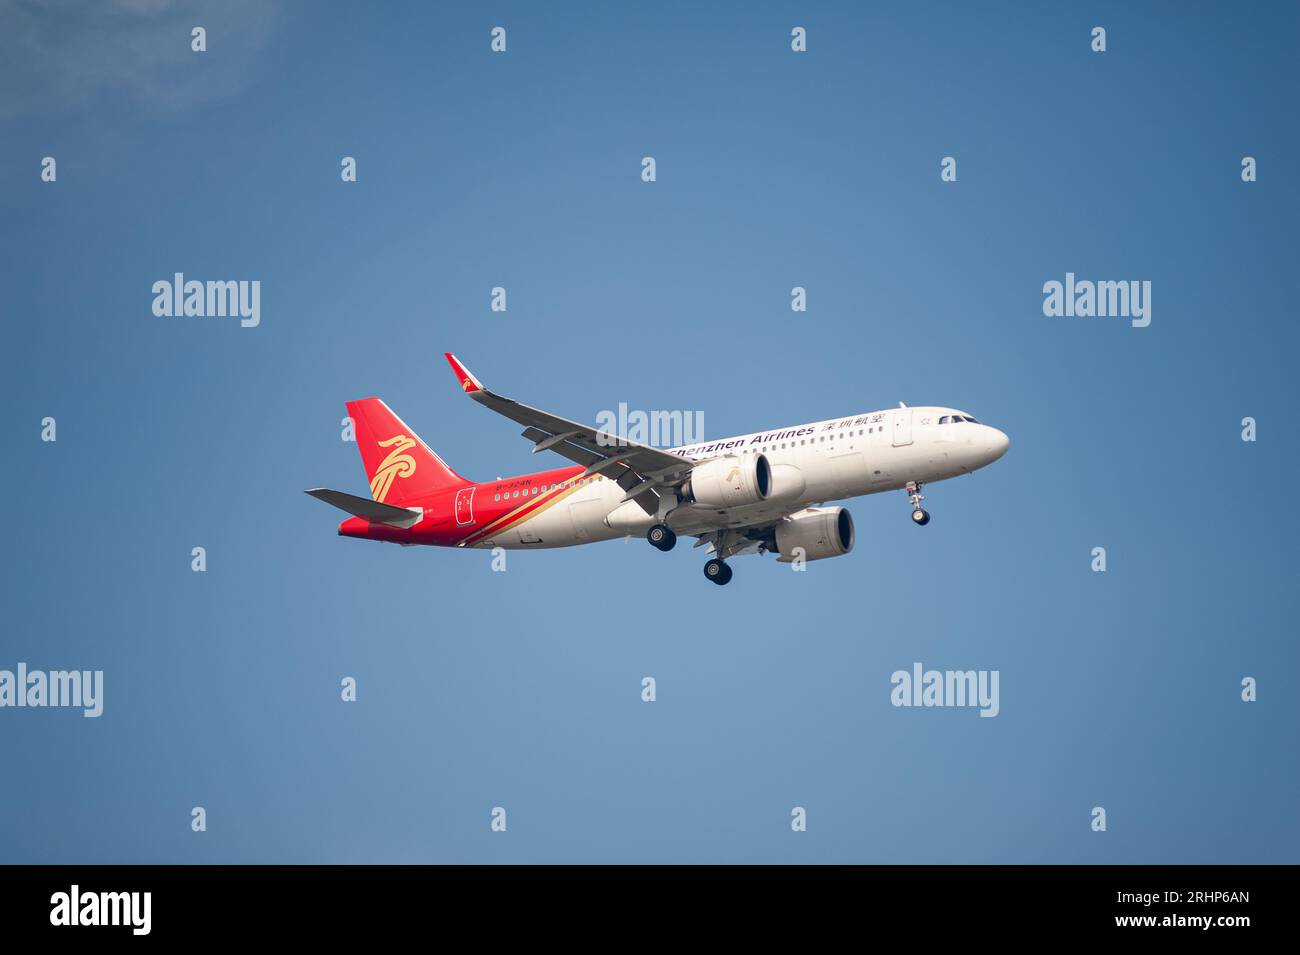 26.07.2023, Singapore, Republic of Singapore, Asia - A Shenzhen Airlines Airbus A320 Neo passenger aircraft approaches Changi Airport for landing. Stock Photo